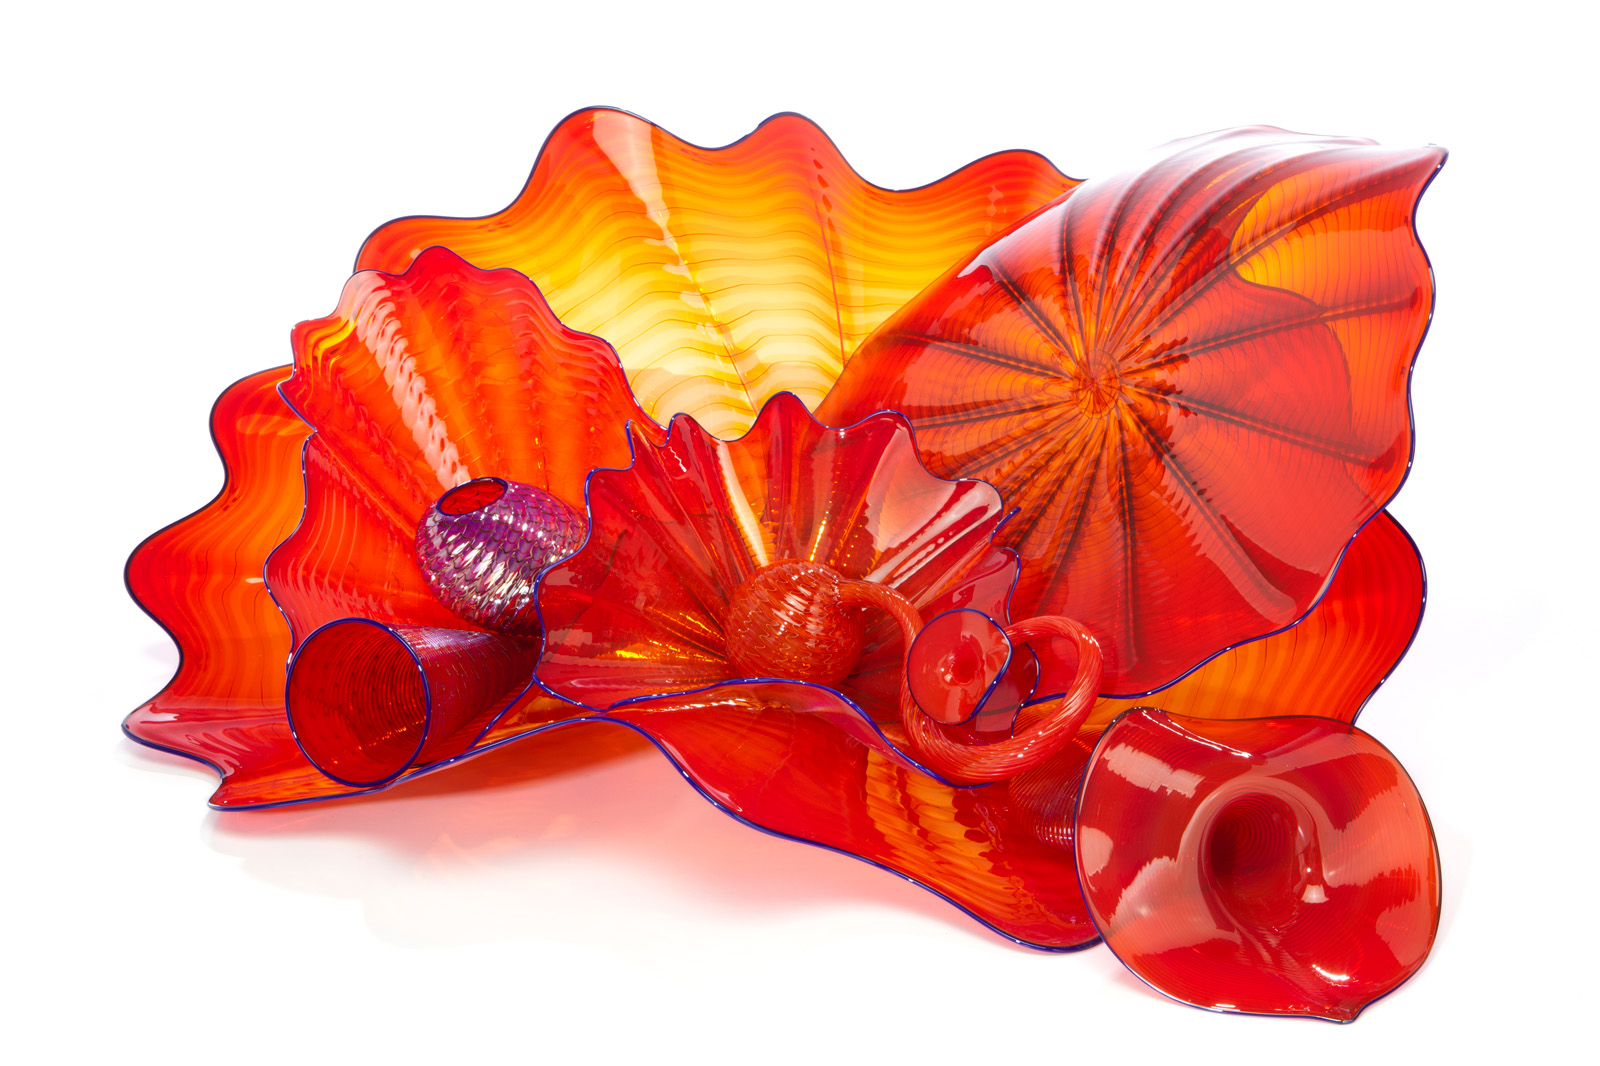 Cerise Persian Set with Royal Blue Lip Wraps, 2012 by Dale Chihuly